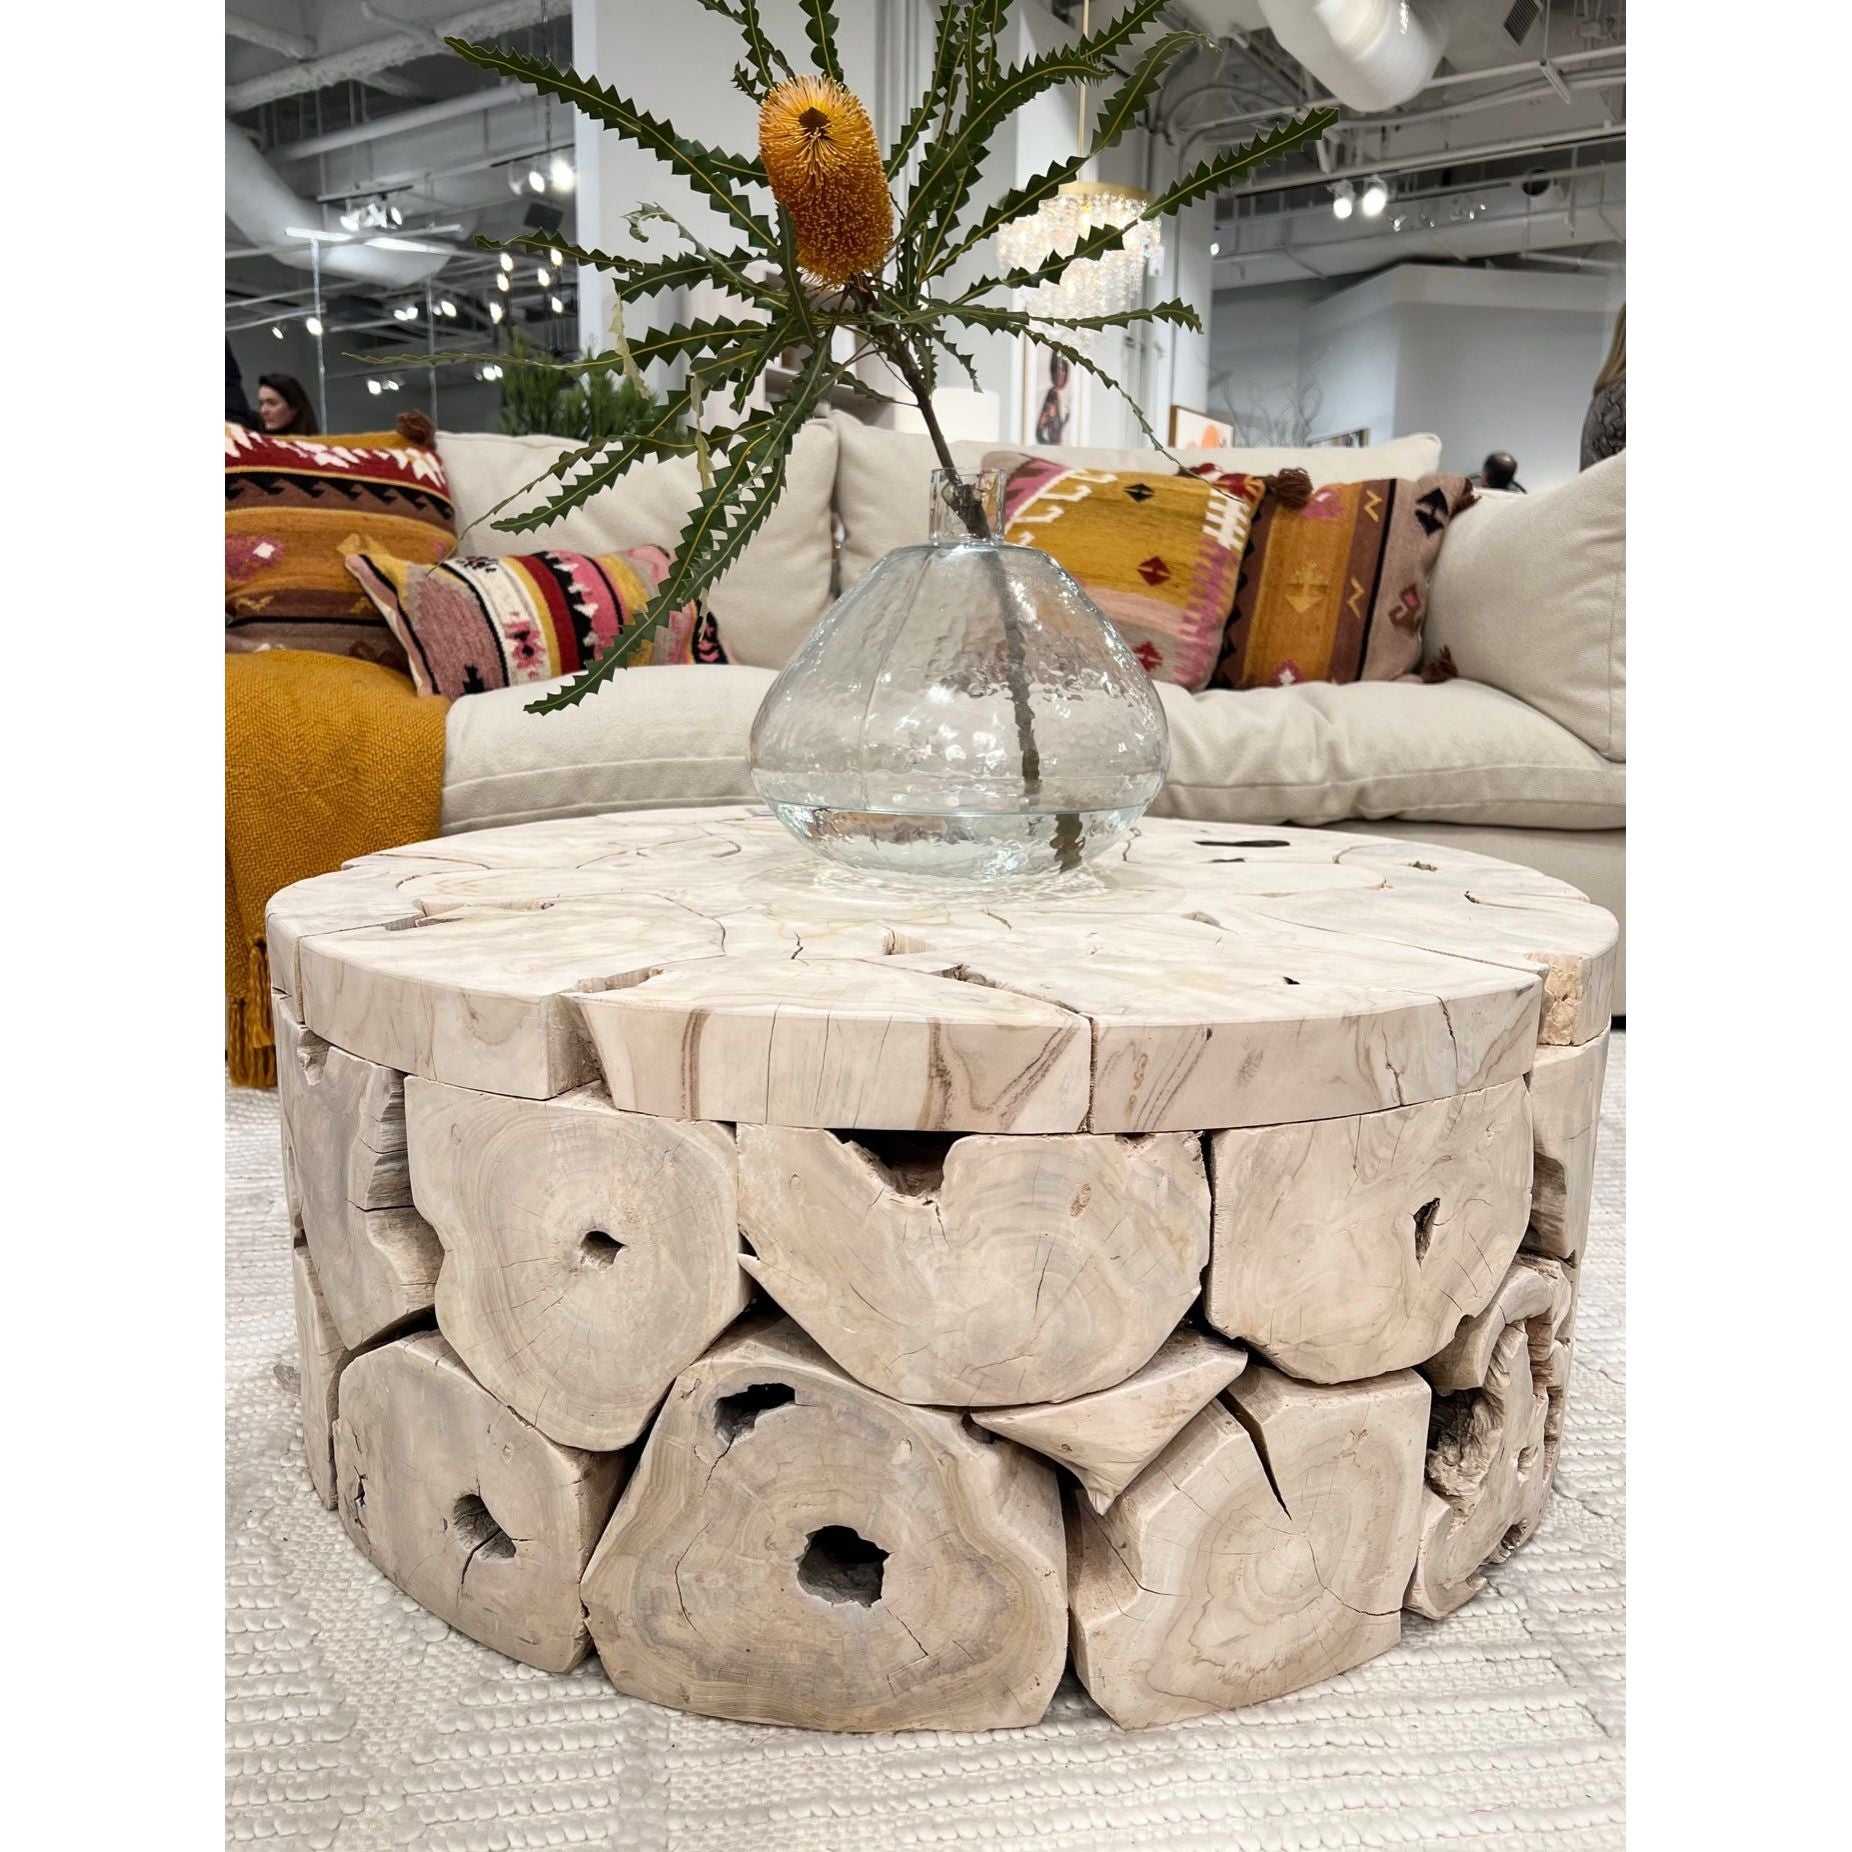 This beautiful Briar Round Coffee Table is pieced together from reclaimed slabs and chunks of solid teak wood finished in a bleached finish with exquisite craftsmanship. Artisans build each coffee table like a puzzle, fitting each piece together in combinations that are never duplicated. Like true works of art, no two will be exactly alike. Amethyst Home provides interior design services, furniture, rugs, and lighting in the Omaha metro area.